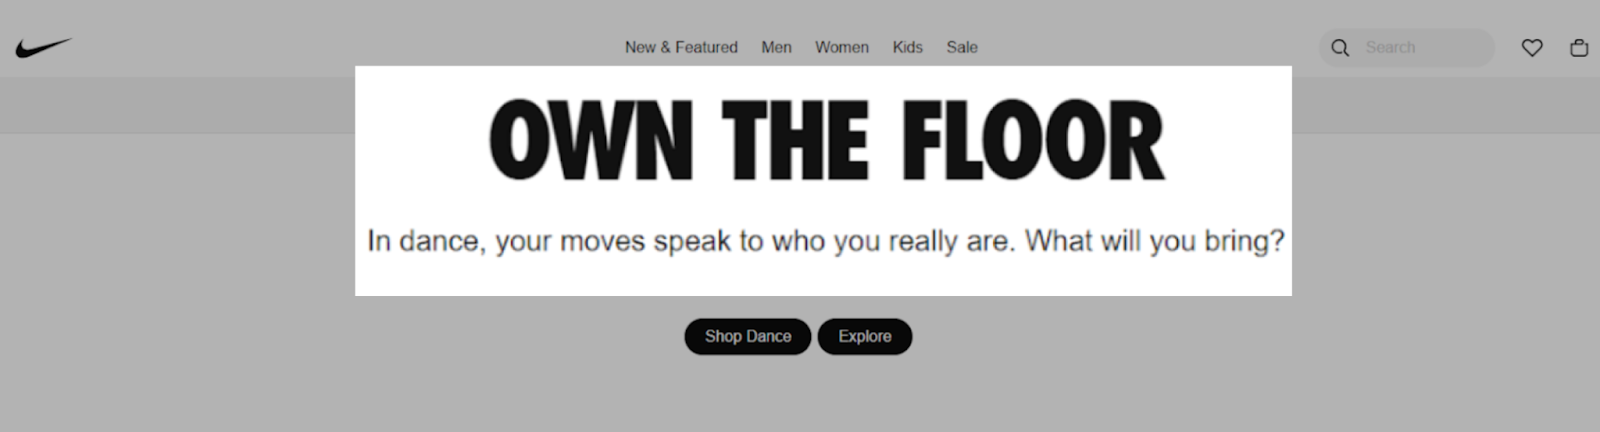 Nike’s ecommerce store message